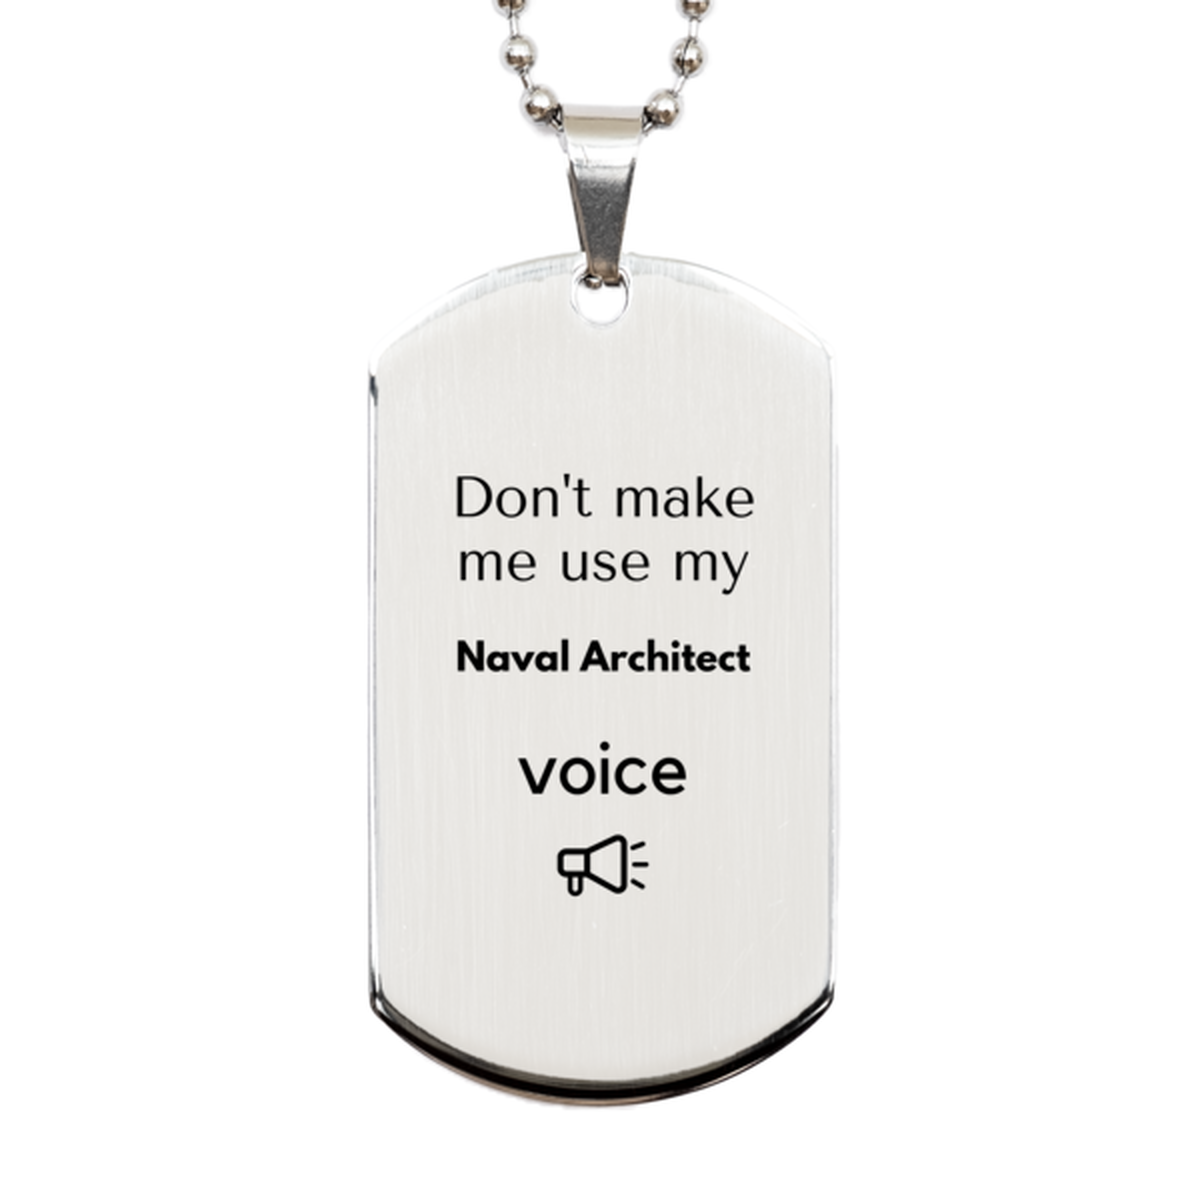 Don't make me use my Naval Architect voice, Sarcasm Naval Architect Gifts, Christmas Naval Architect Silver Dog Tag Birthday Unique Gifts For Naval Architect Coworkers, Men, Women, Colleague, Friends